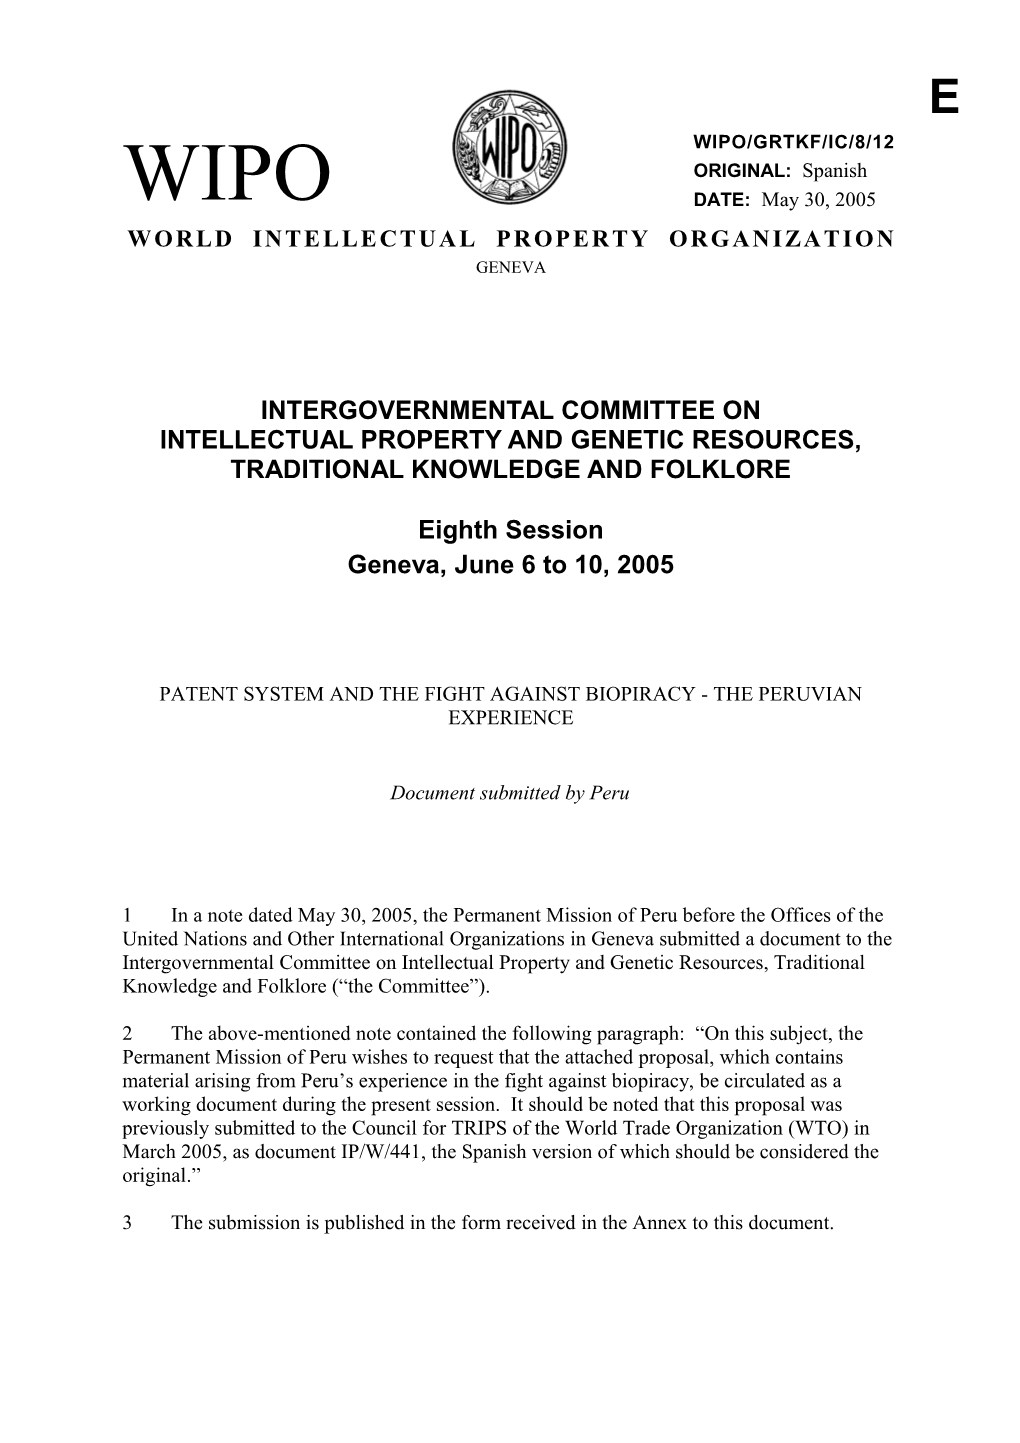 WIPO/GRTKF/IC/8/12: Patent System and the Fight Against Biopiracy - the Peruvian Experience